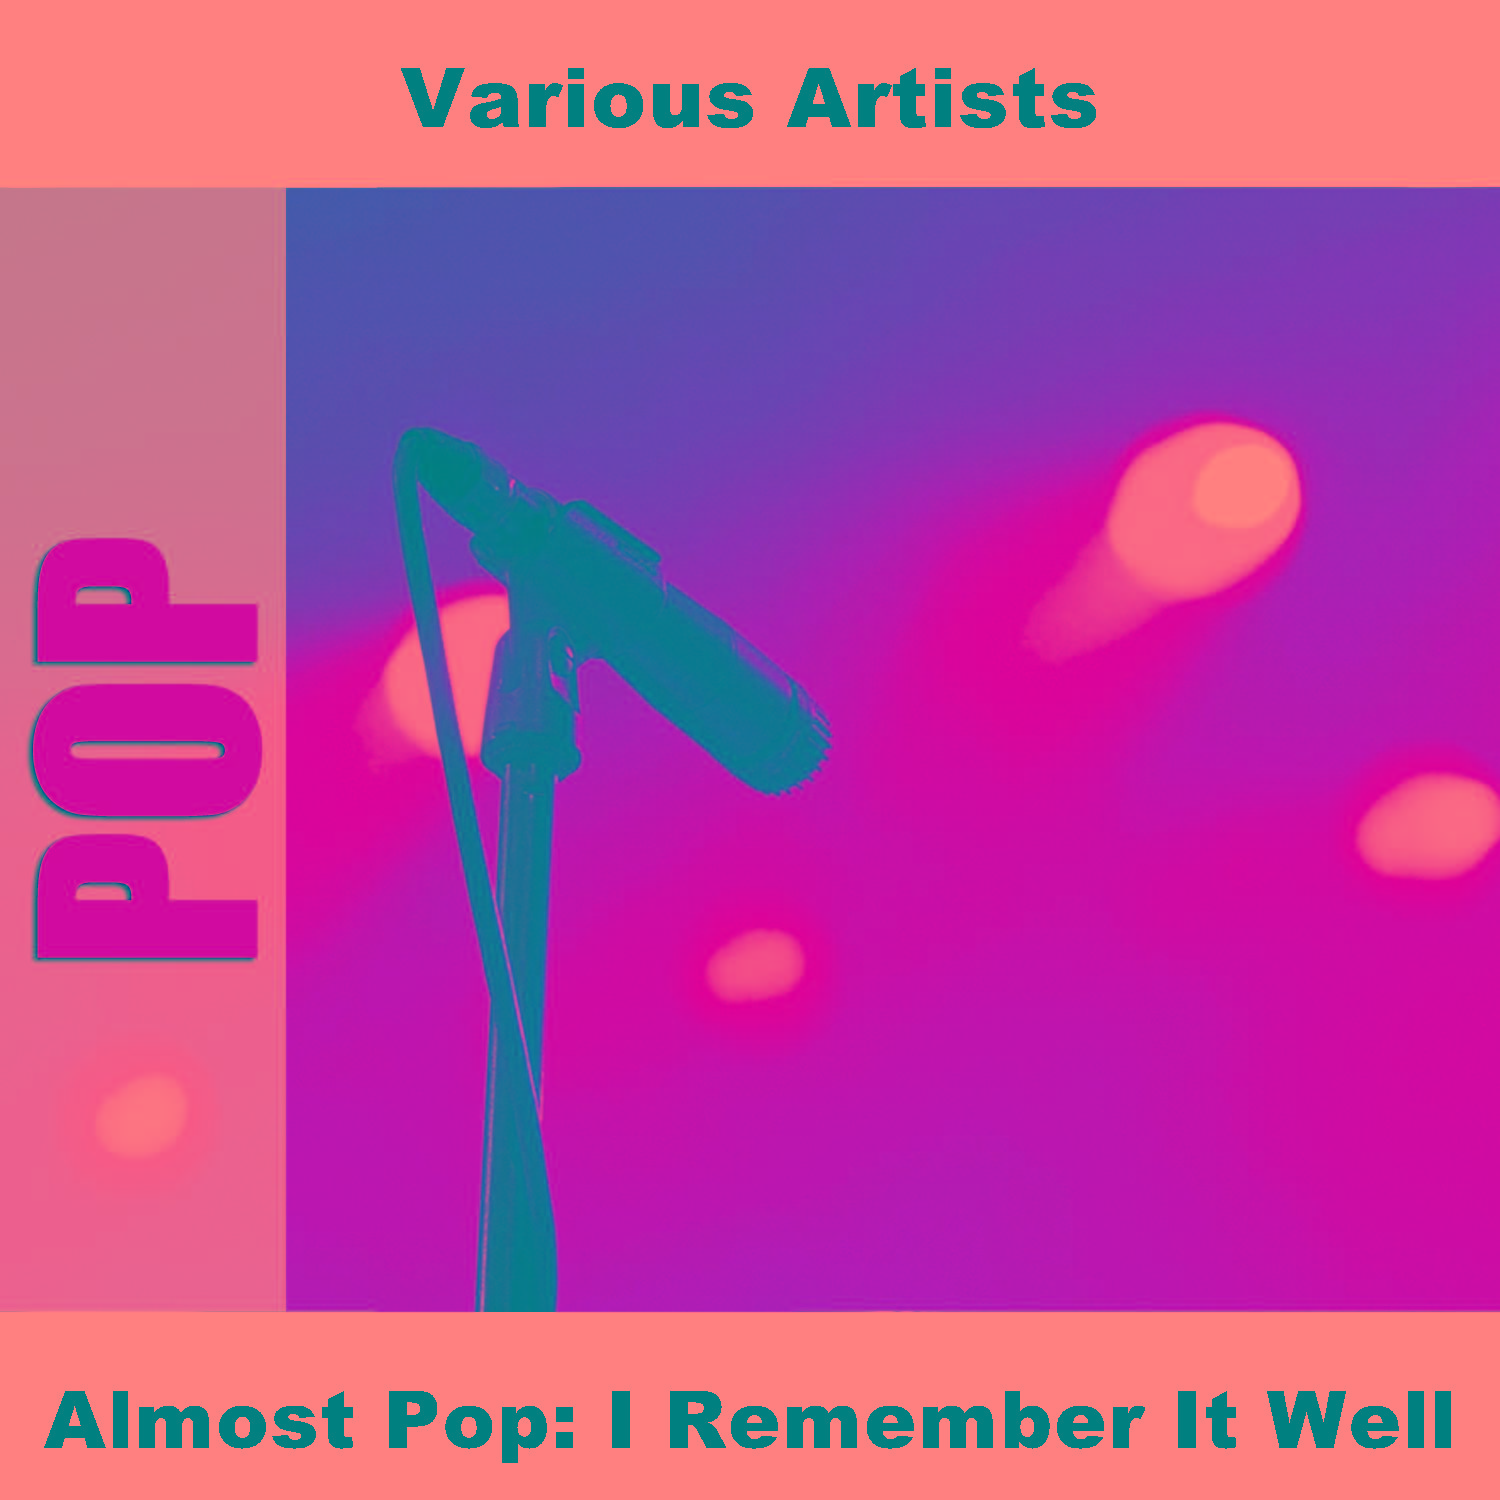 Almost Pop: I Remember It Well